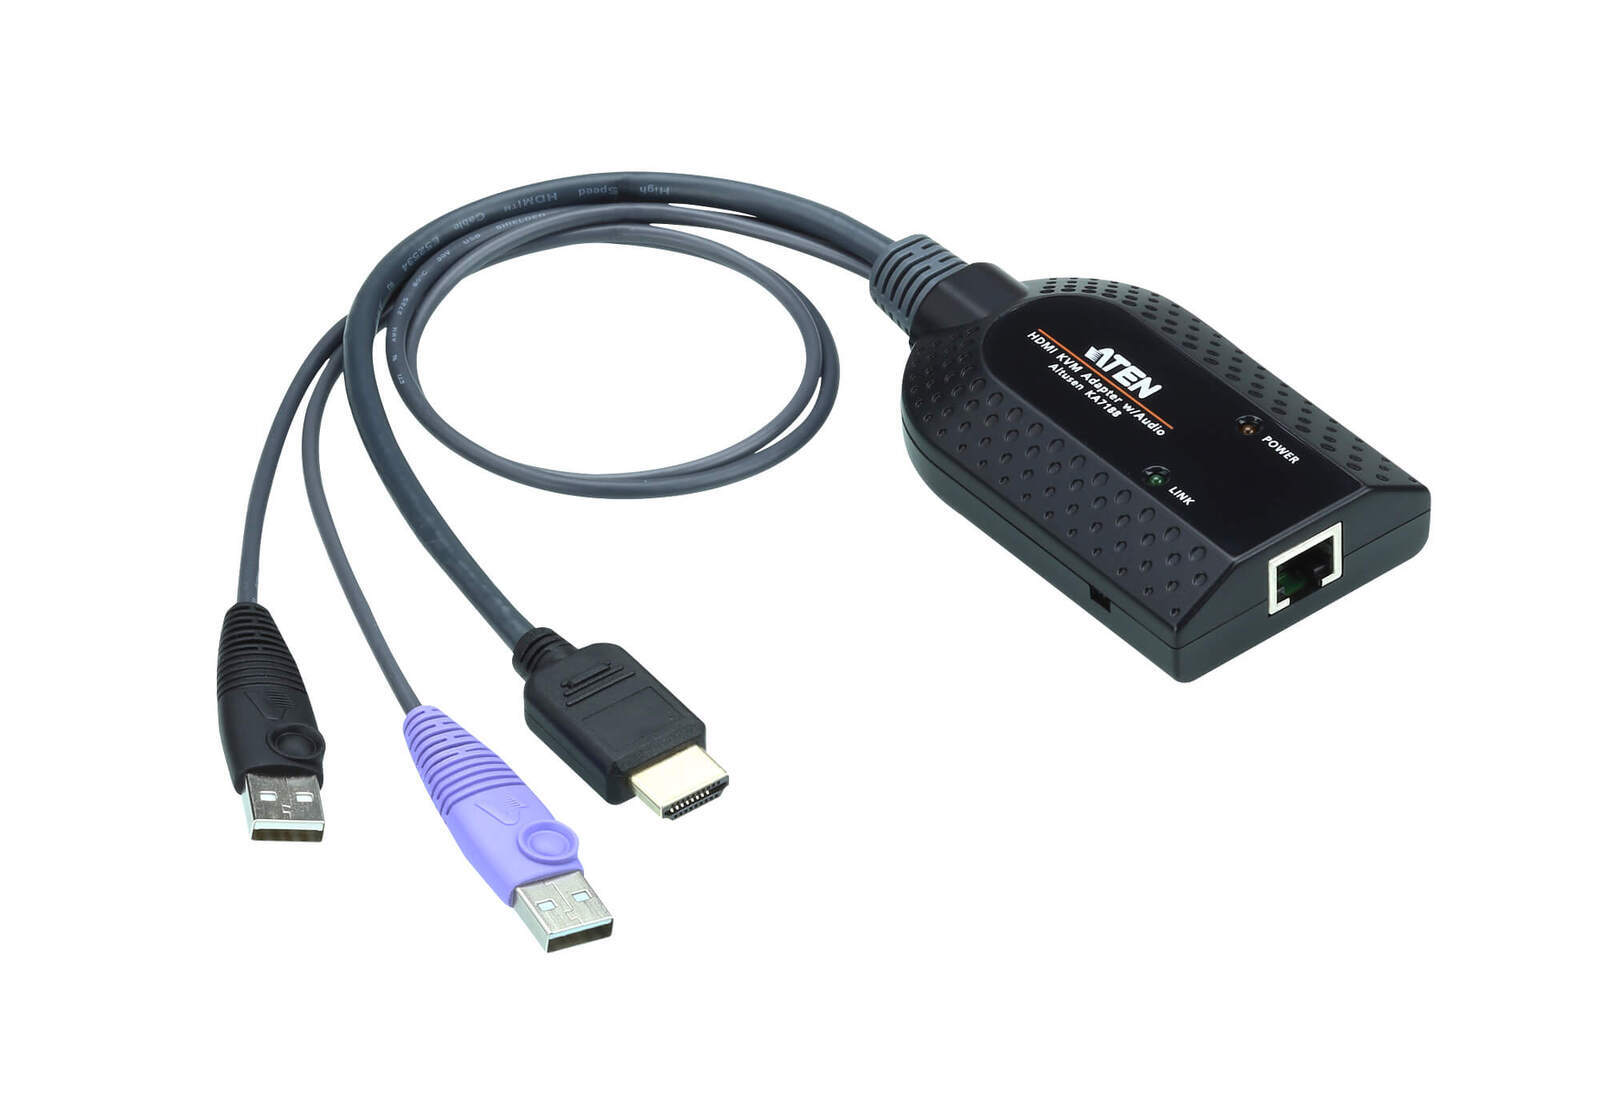 Aten KVM Cable Adapter with RJ45 to HDMI & USB to suit KM and KN series